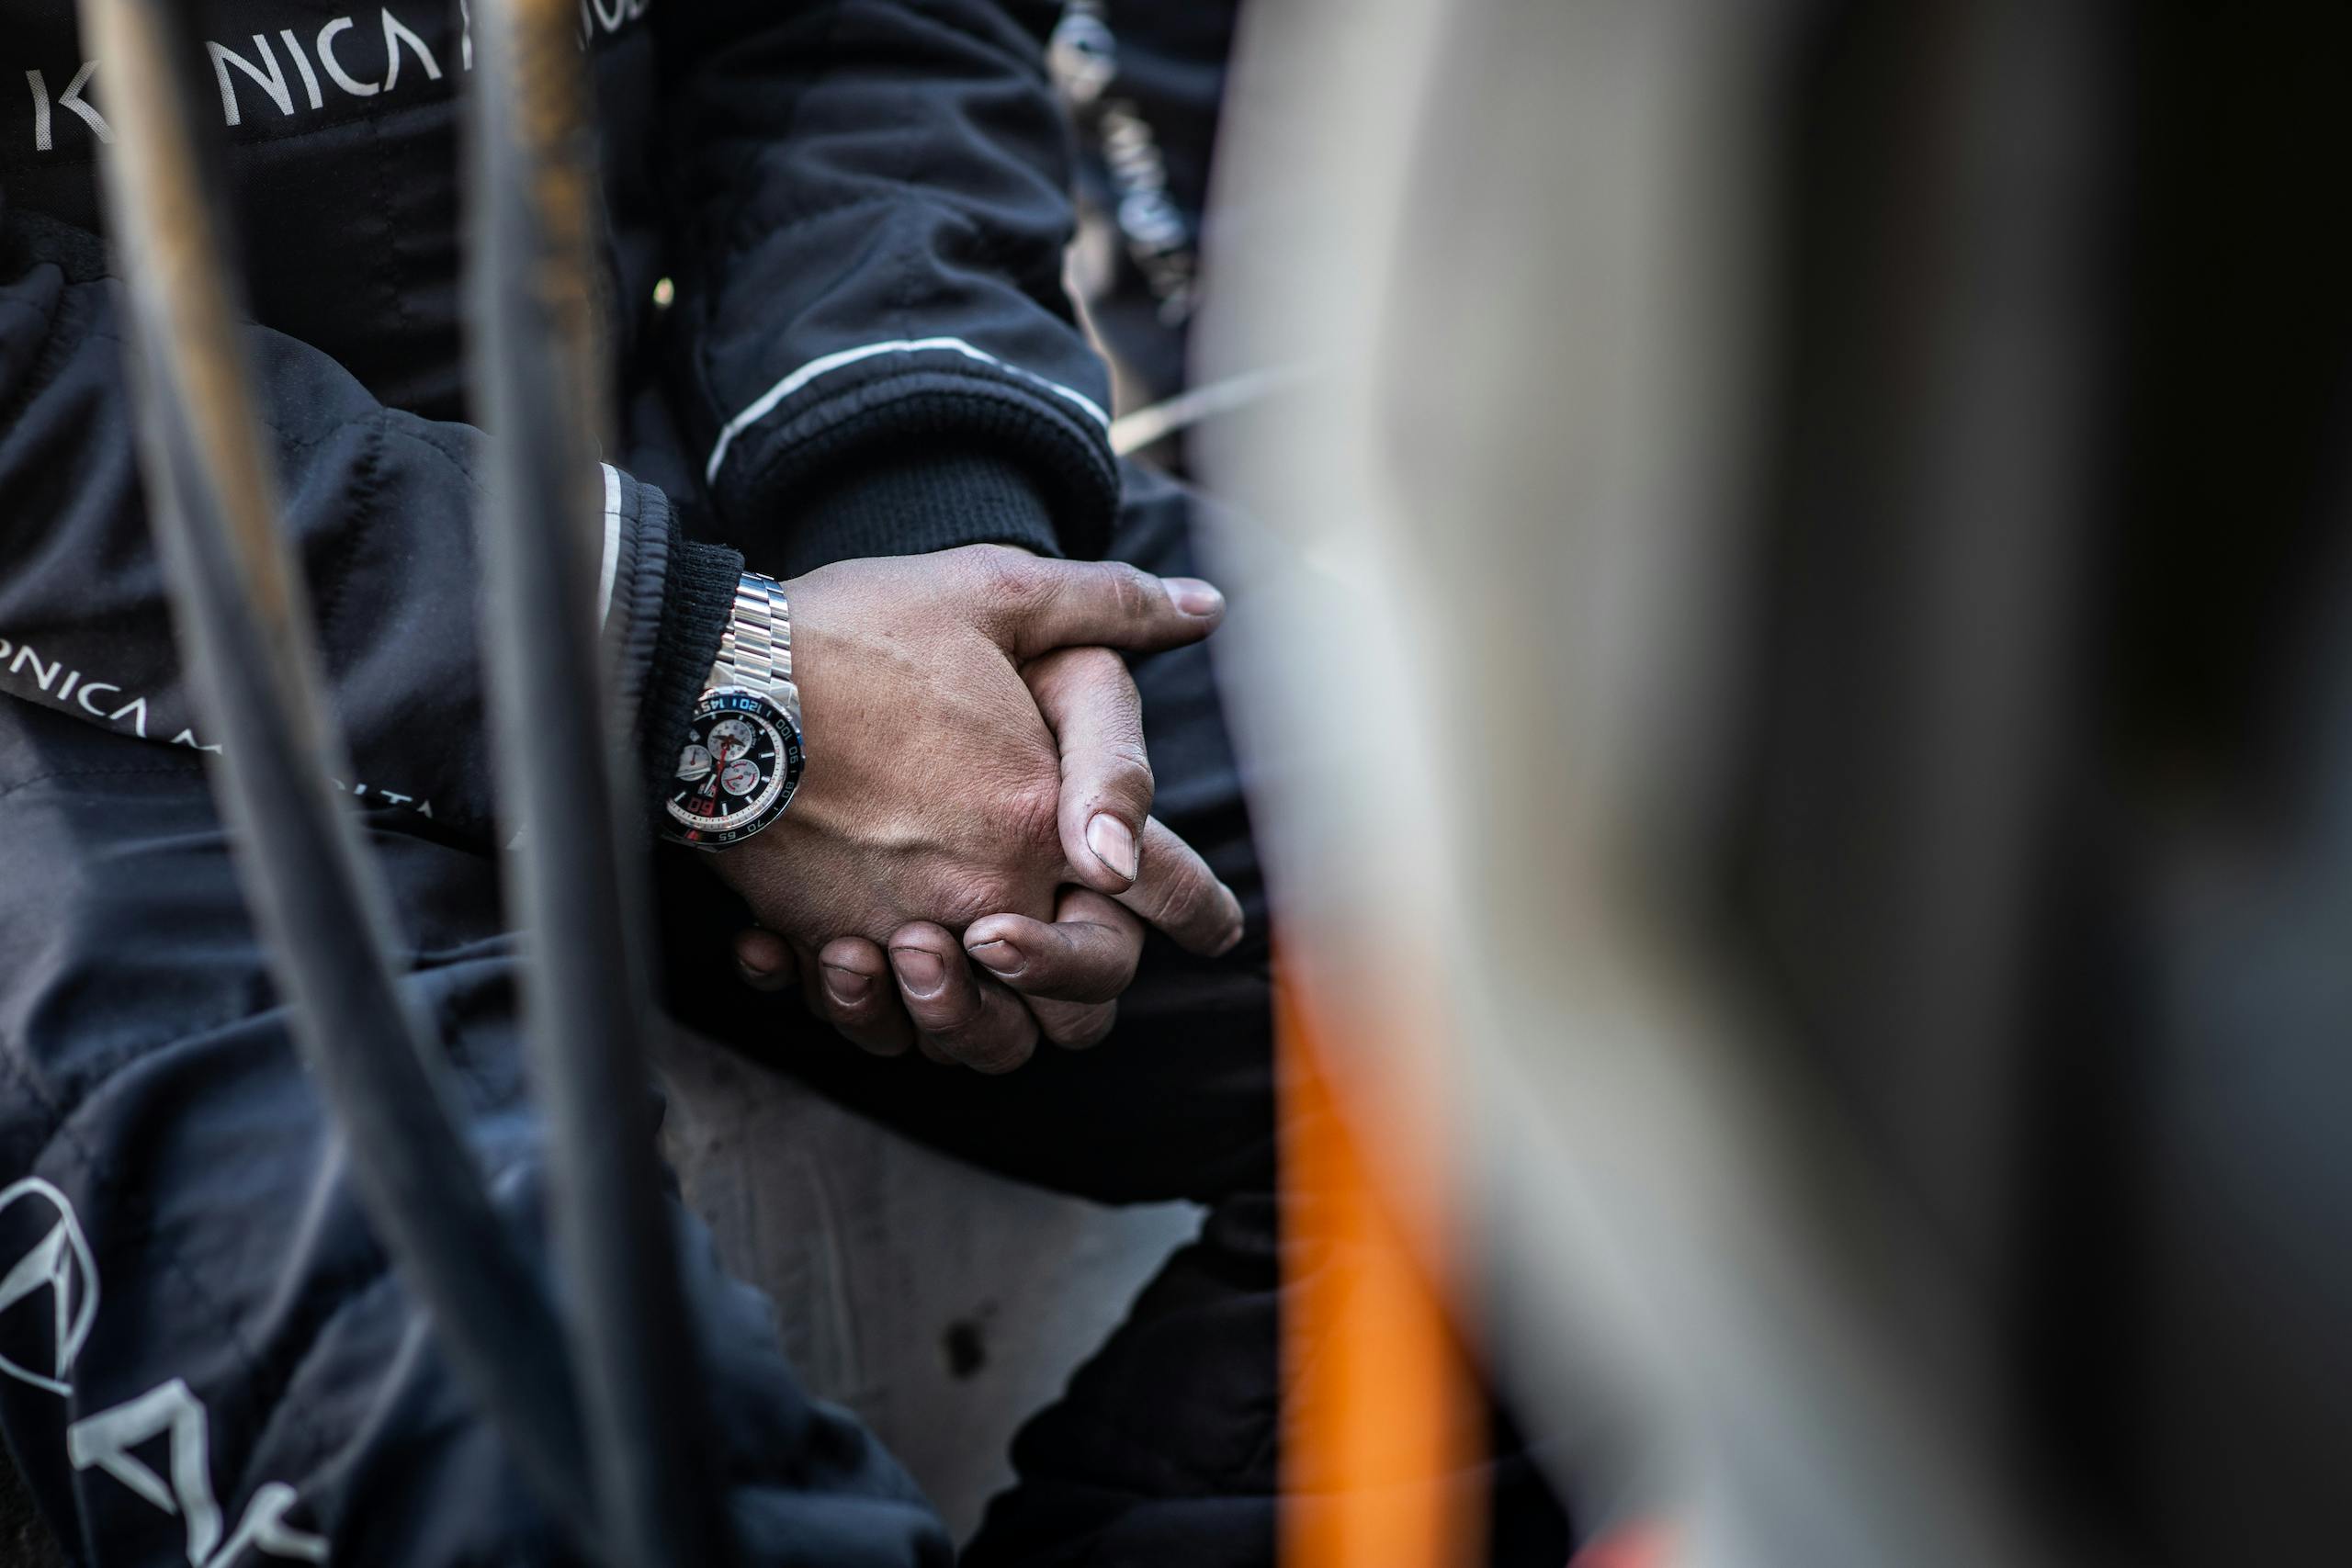 2022 Rolex 24 at Daytona driver hands and watch